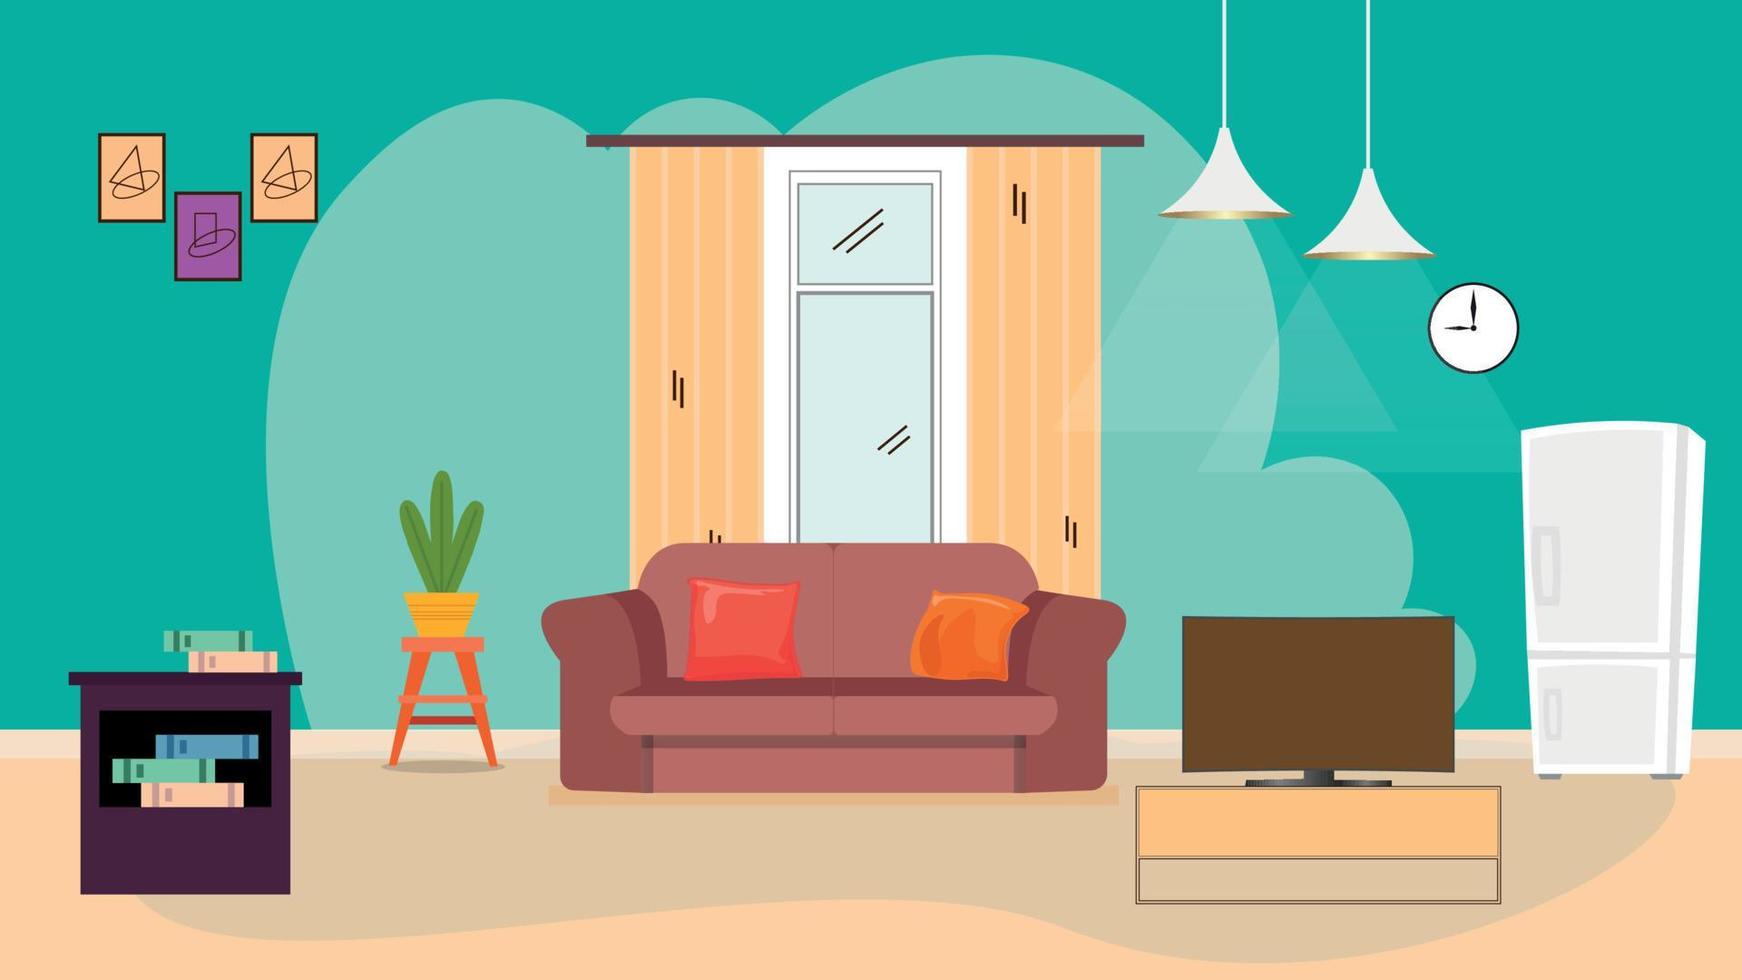 Interior of living room with sofa, lamp, window vector